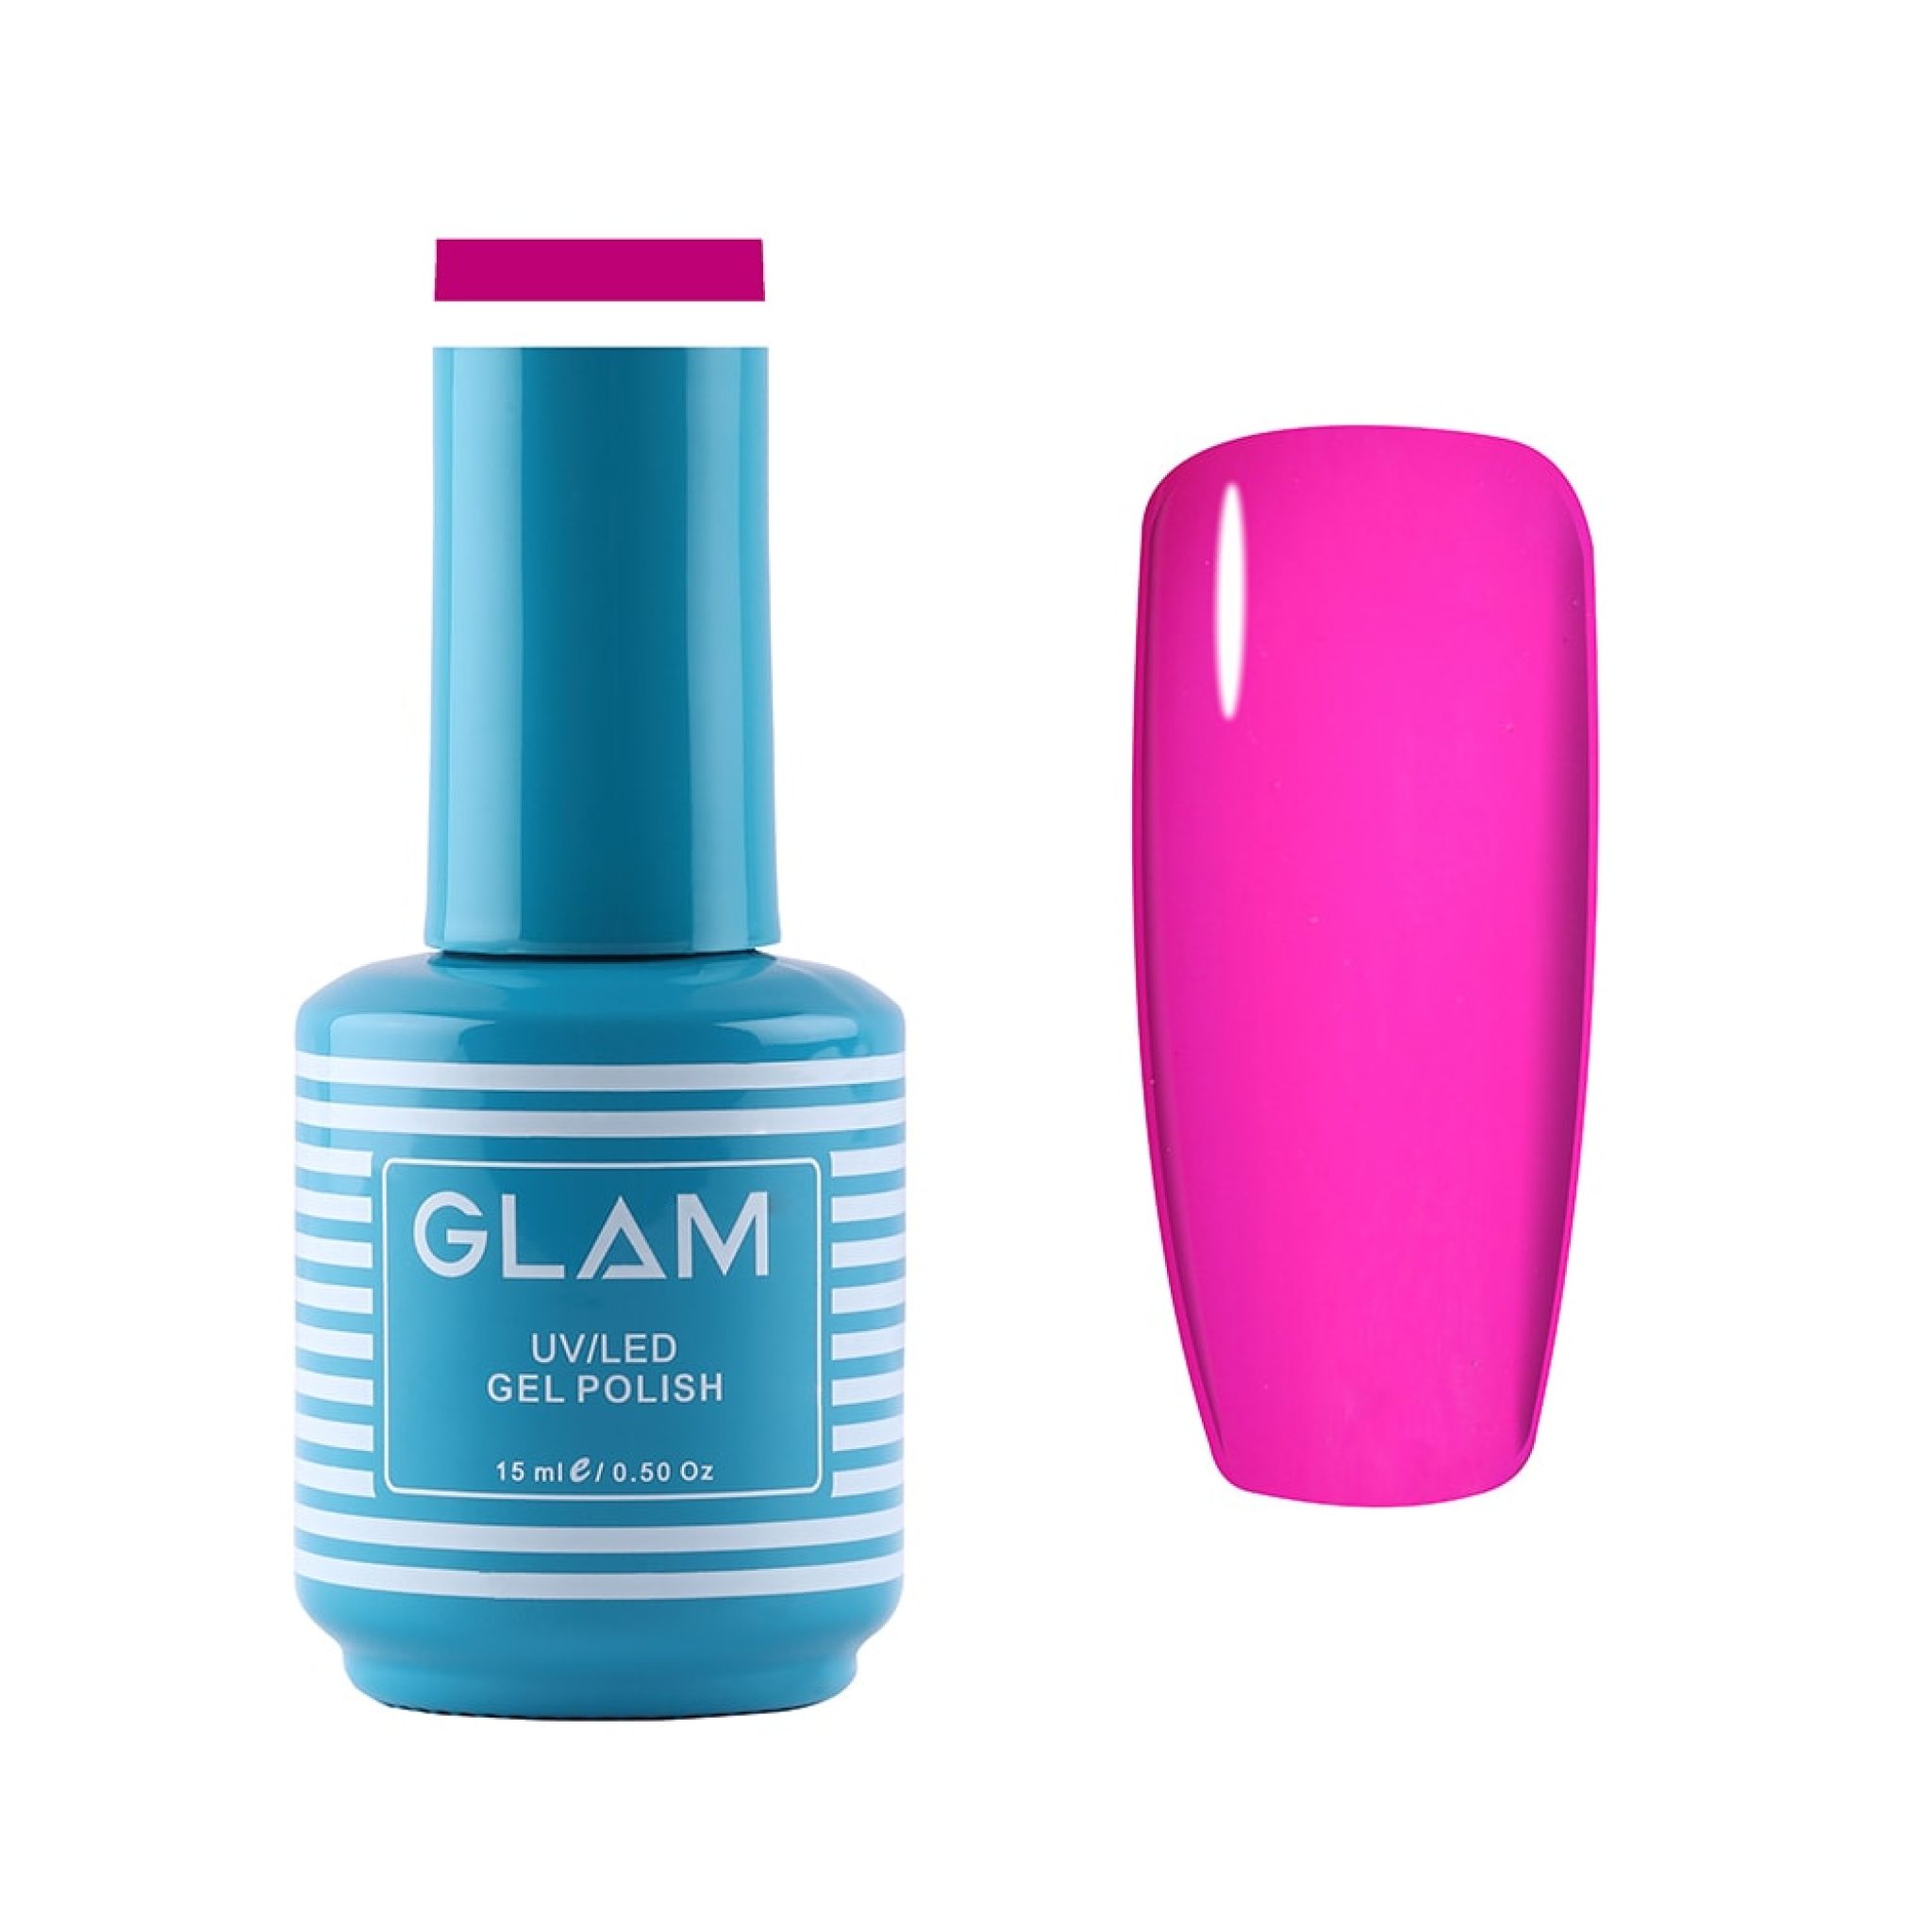 Best Nail Products | India's #1 Nails Brand - GLAM Nails India